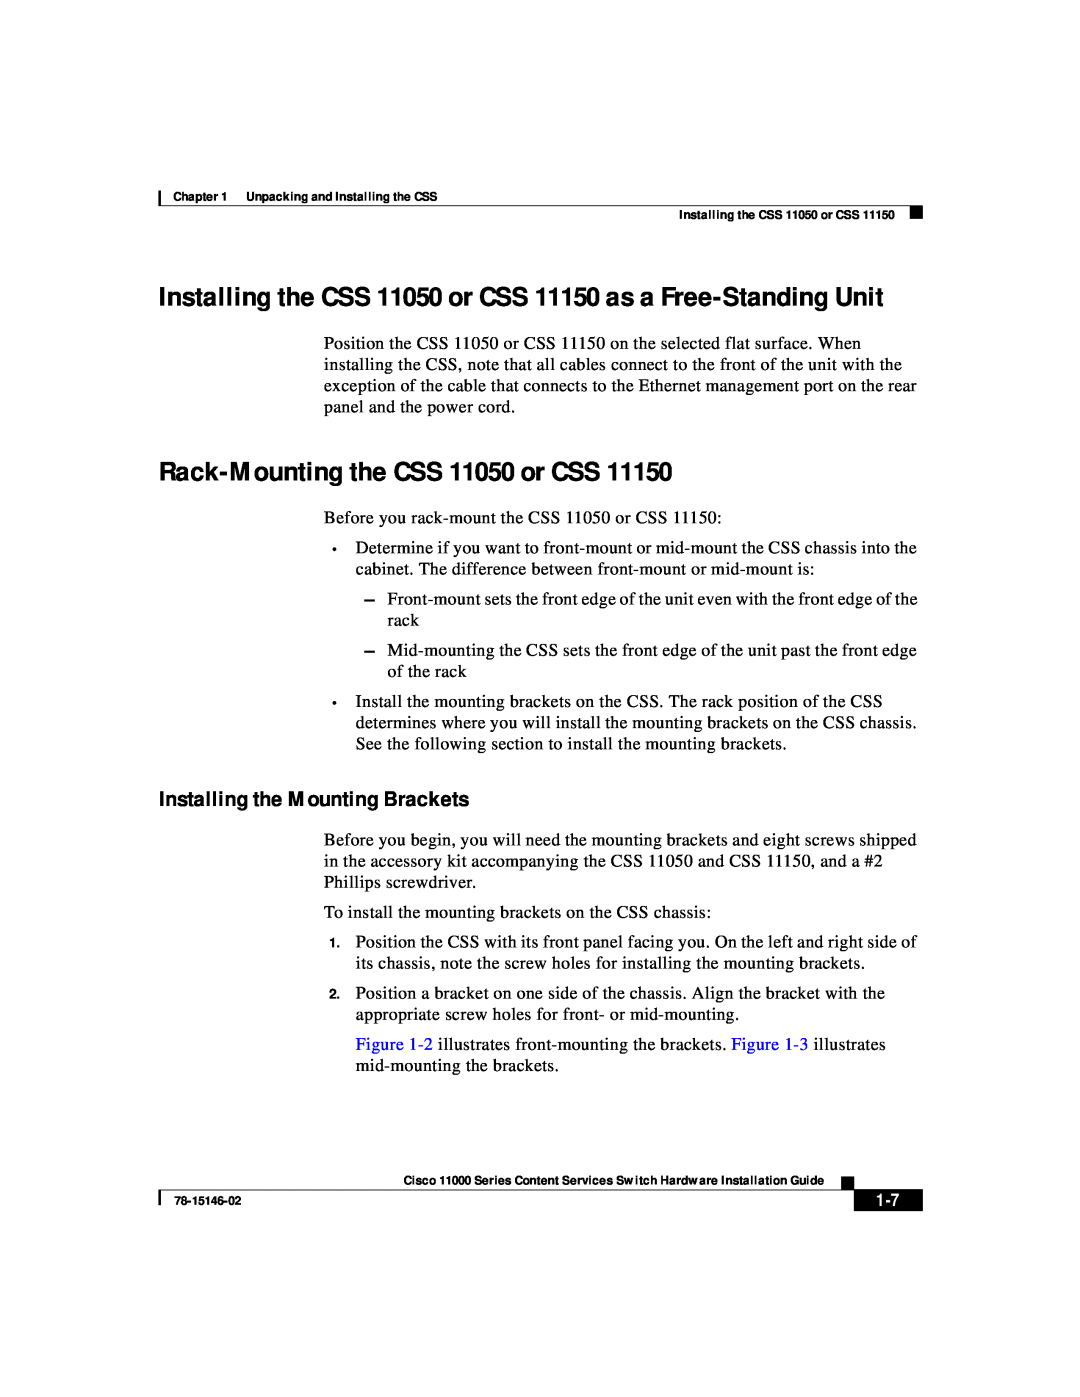 Cisco Systems 11000 Series manual Rack-Mounting the CSS 11050 or CSS, Installing the Mounting Brackets 